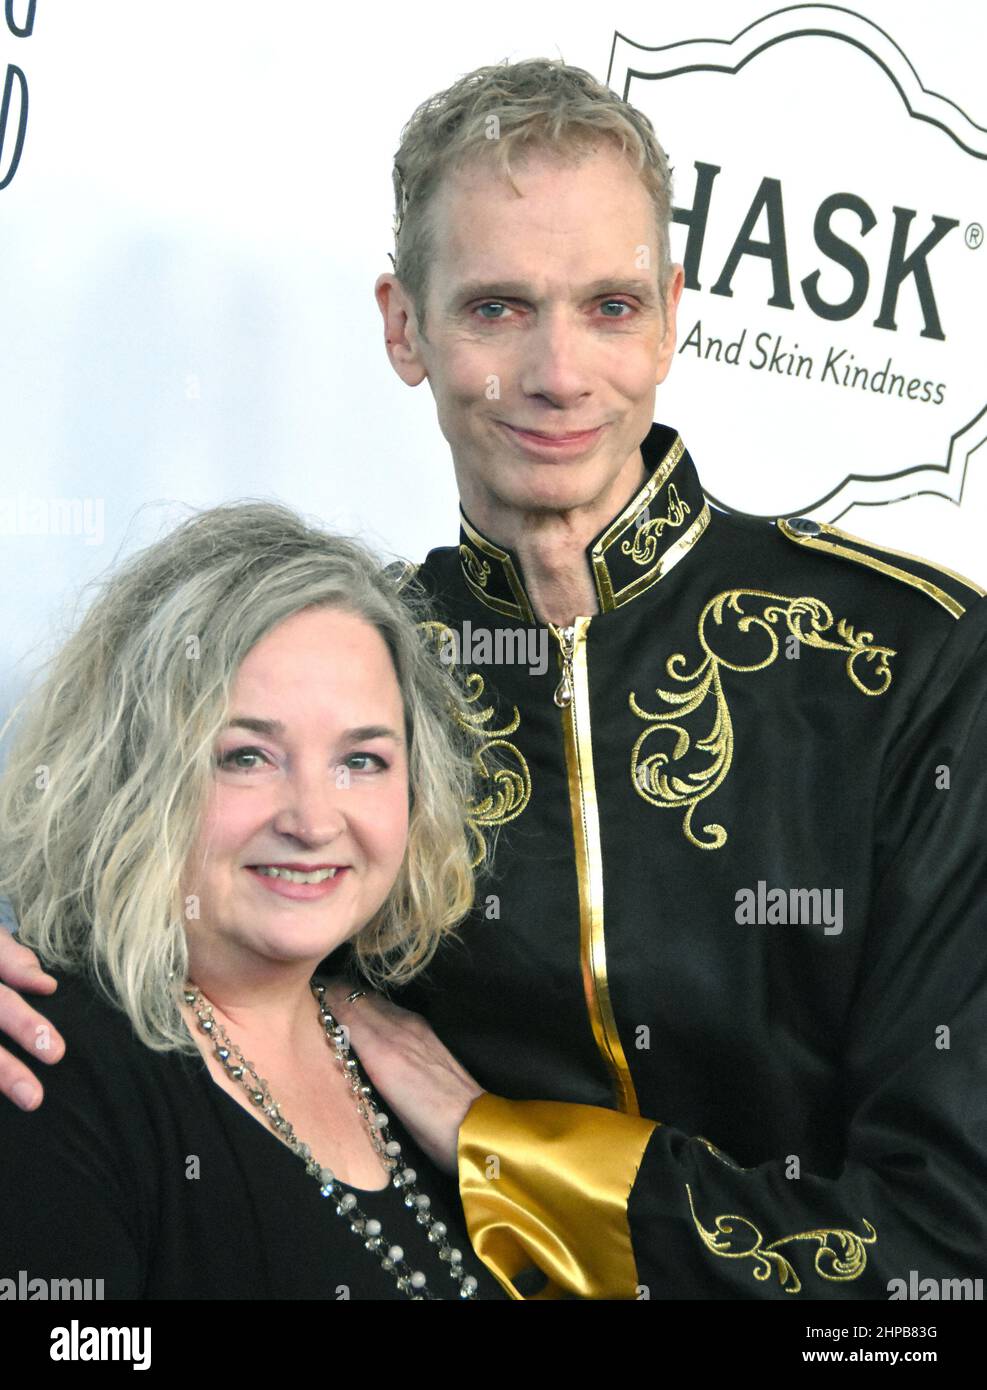 Beverly Hills, California, USA 19th February 2022 Actor Doug Jones and wife Laurie Jones attend the Ninth Annual Make-up Artists & Hair Stylists Guild Awards at the Beverly Hilton Hotel on February 19, 2022 in Beverly Hills, California, USA. Photo by Barry King/Alamy Live News Stock Photo